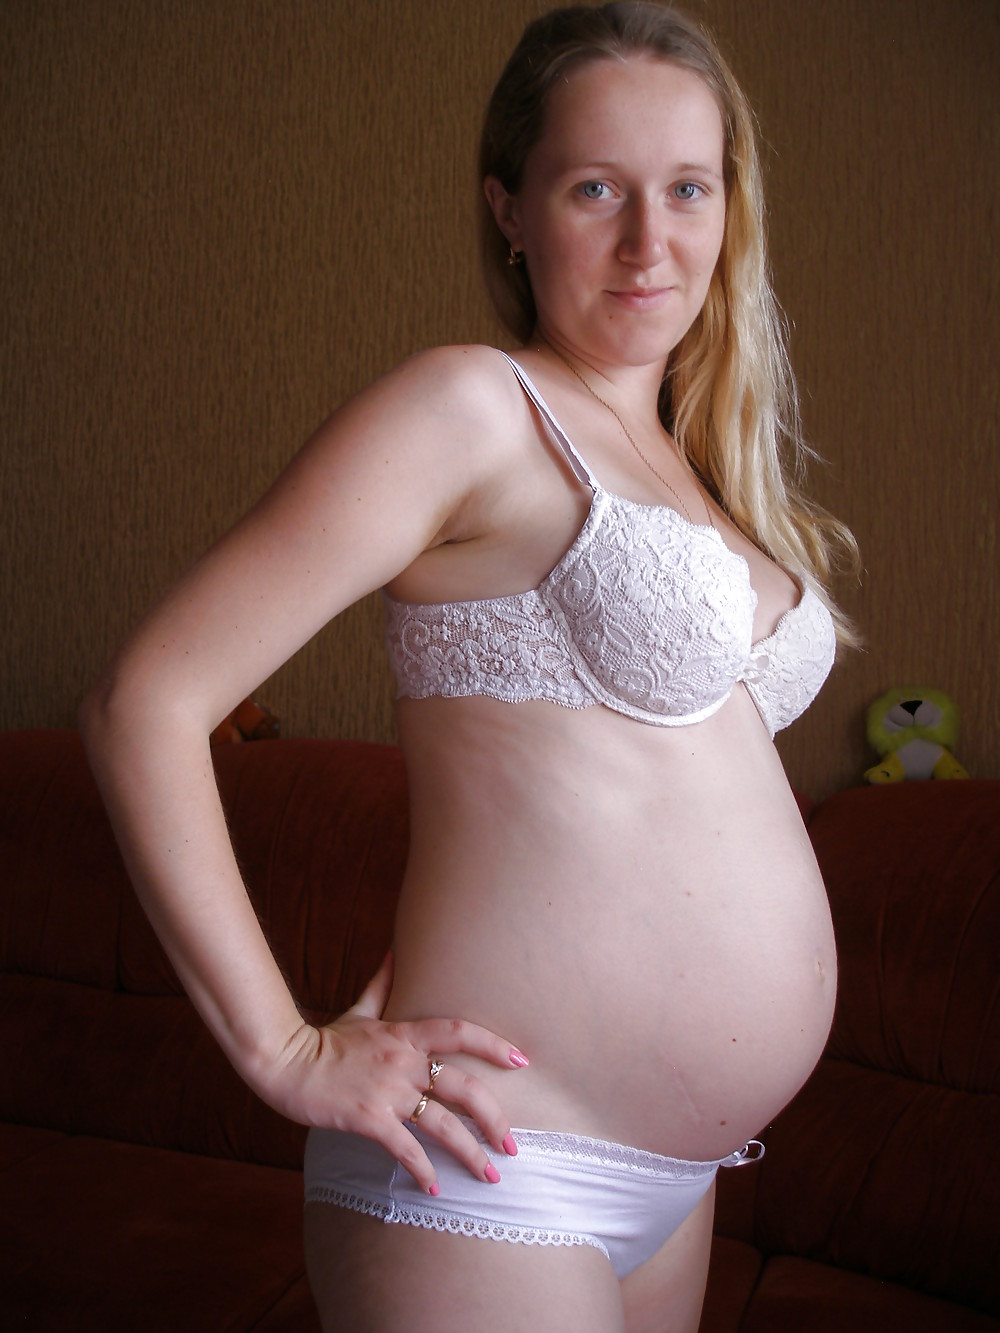 Sex Gallery sweet amateur preggo - searching for more pics from her